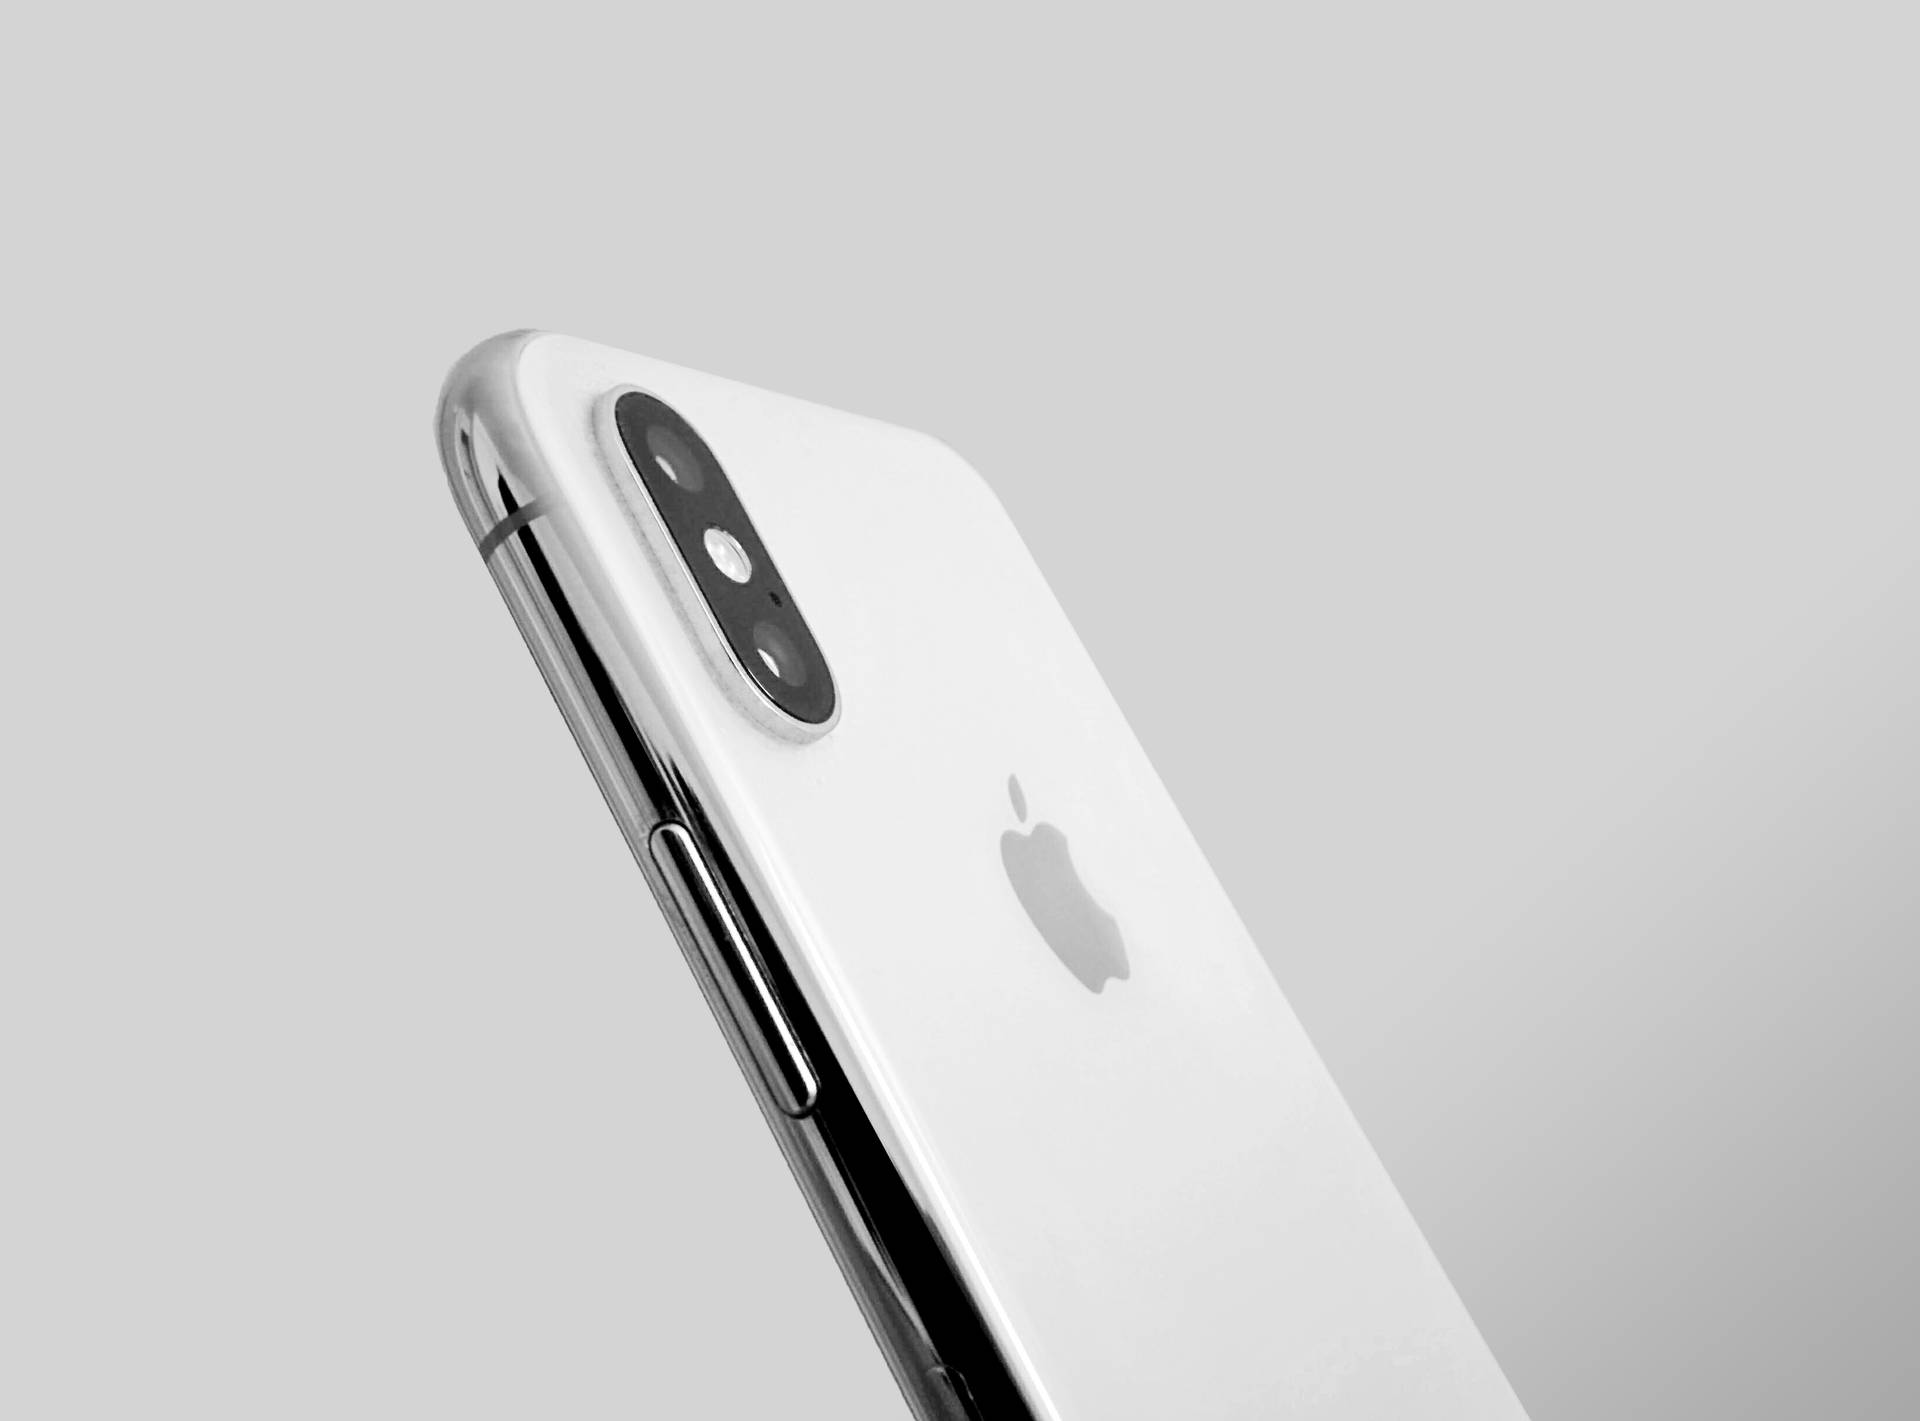 IPhone XS 3286X2432 Wallpaper and Background Image